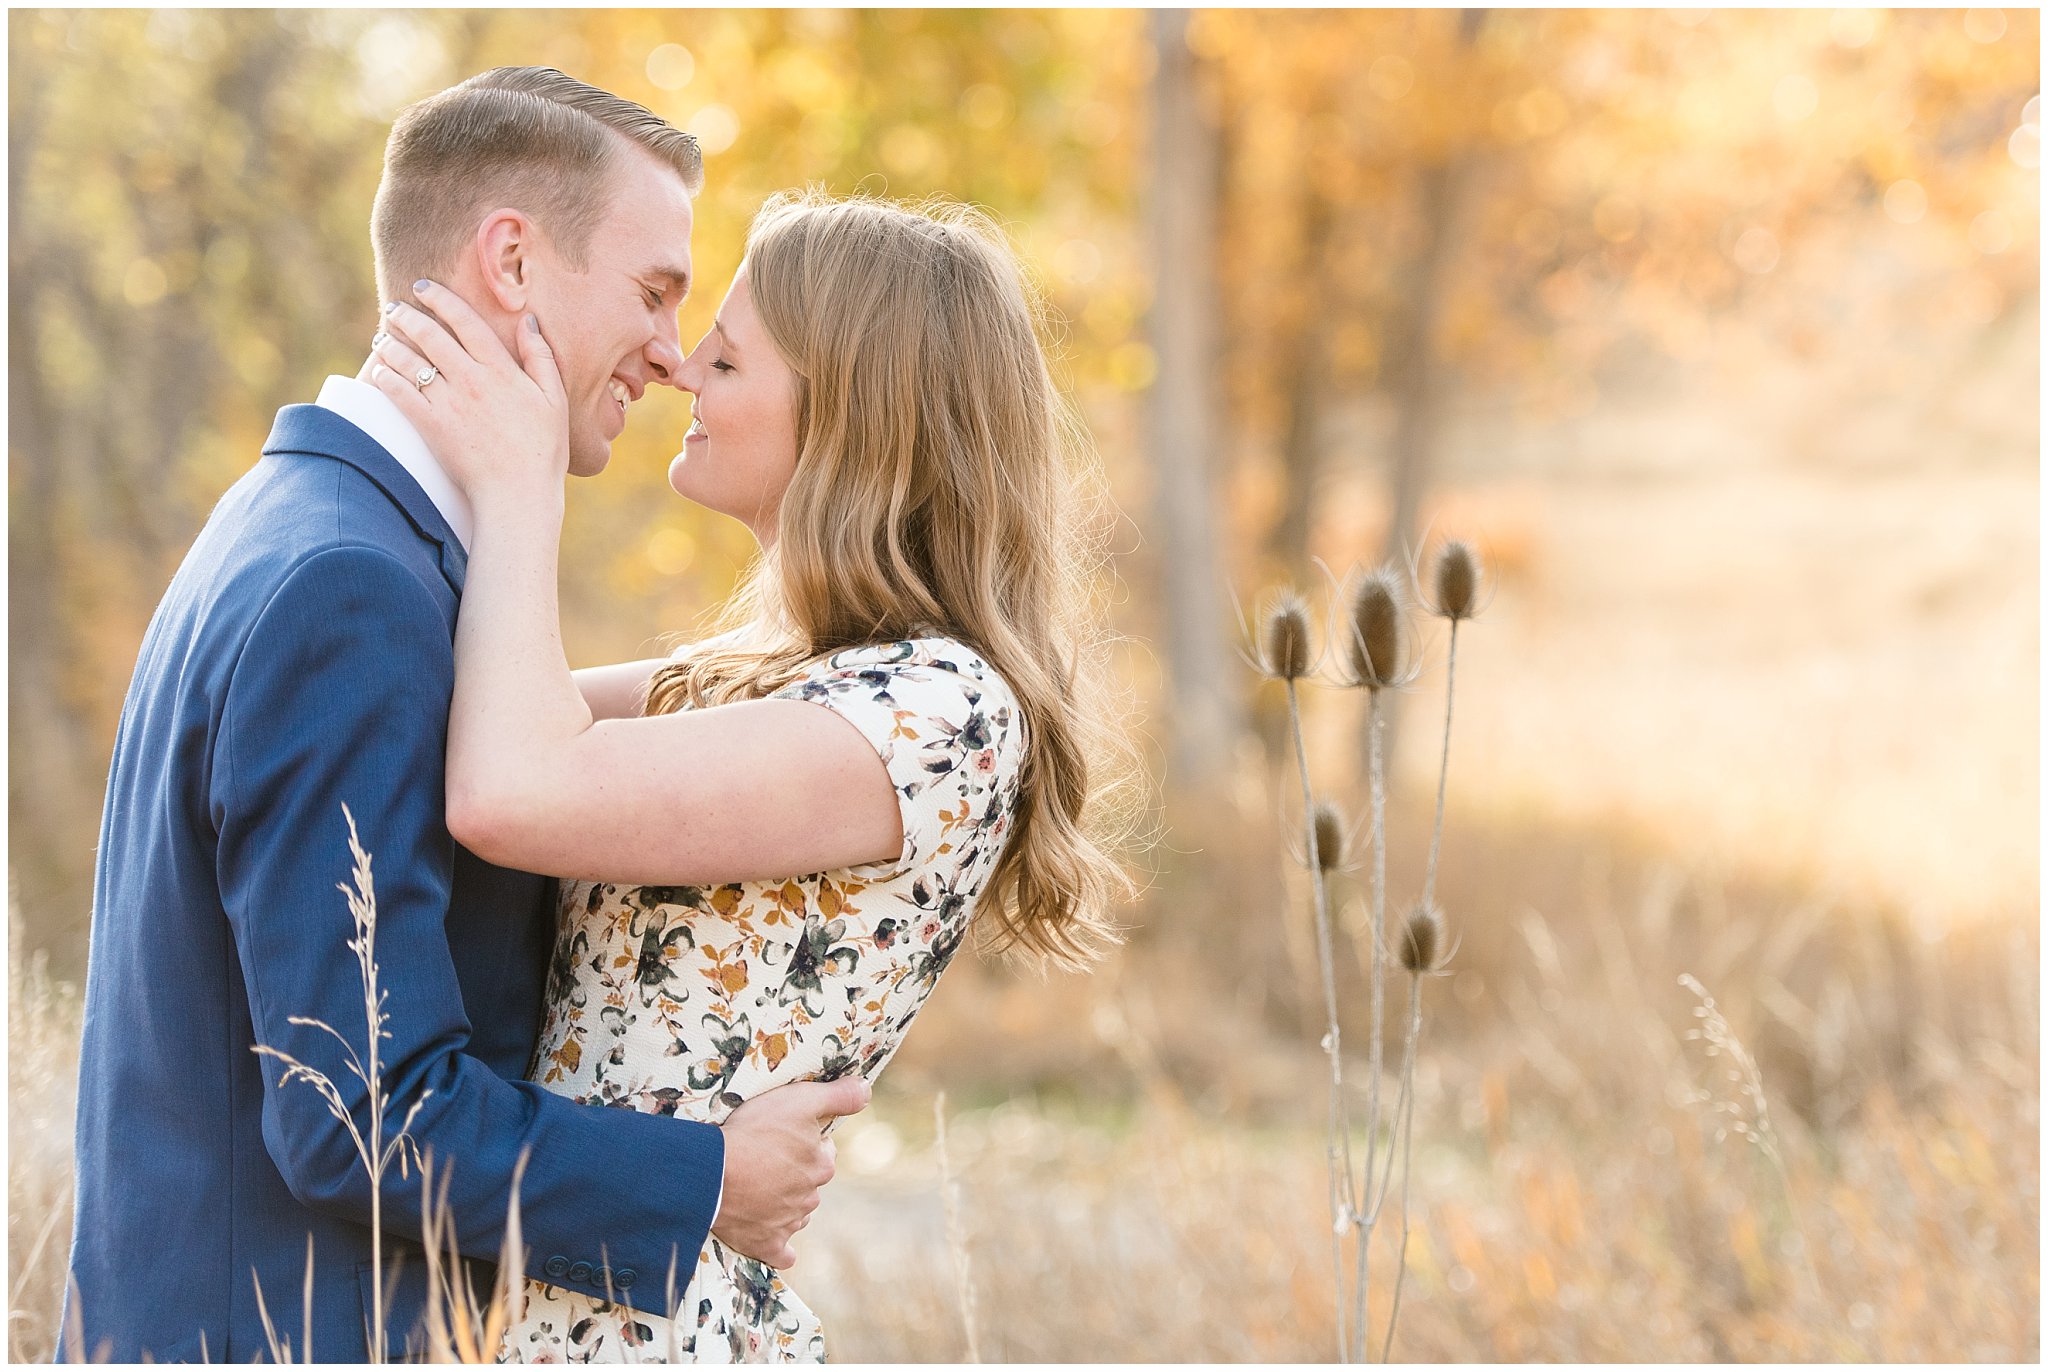 Utah fall engagement photography | Couple leaning for a kiss | Jessie and Dallin Photography